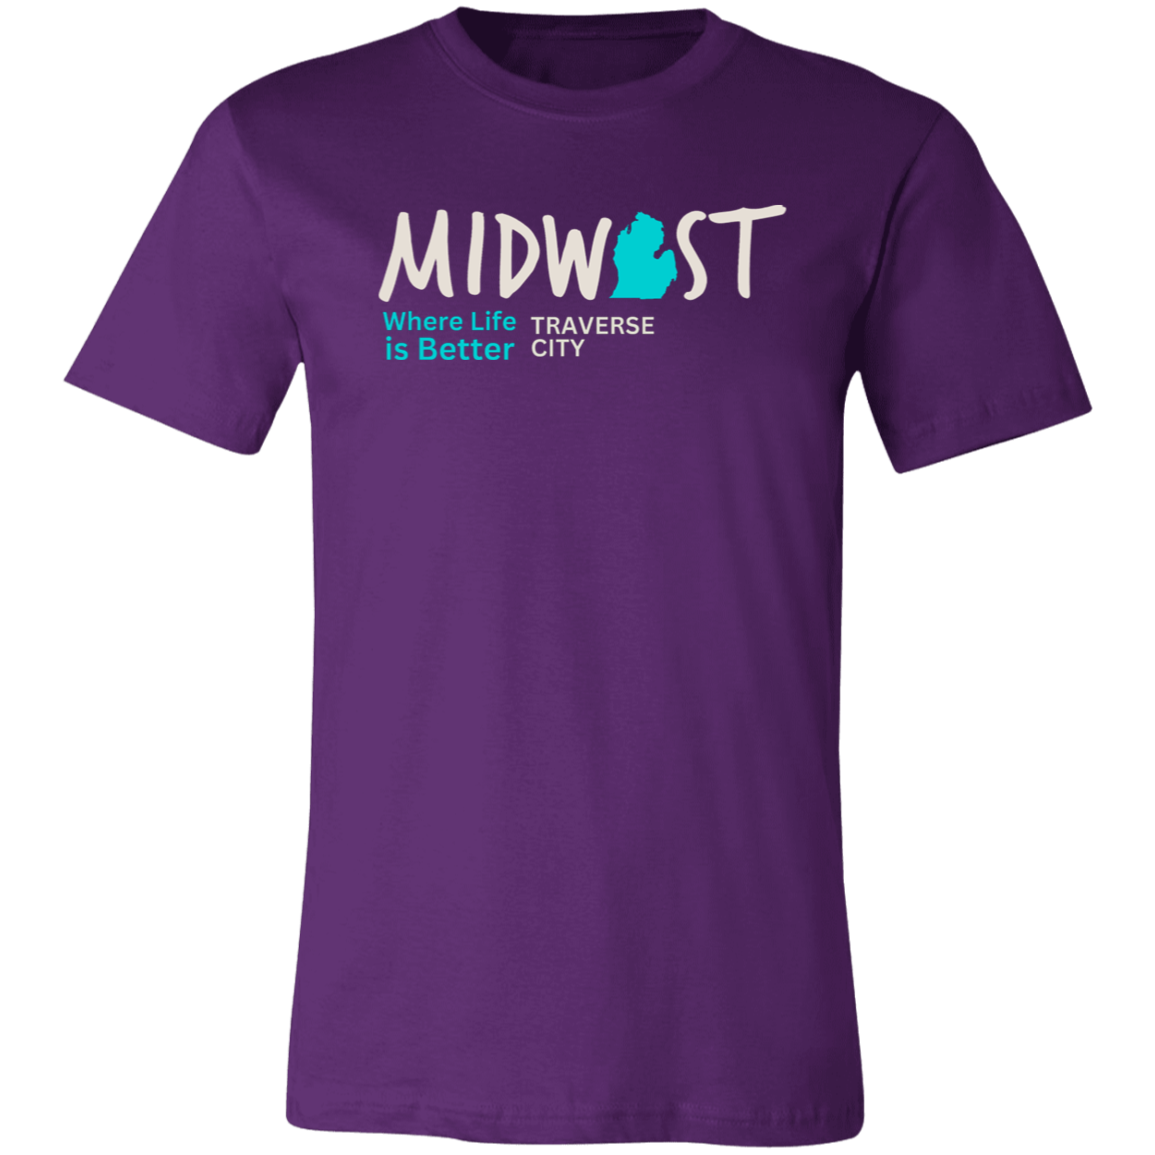 Midwest Where Life is Better Traverse City Unisex Jersey Tee